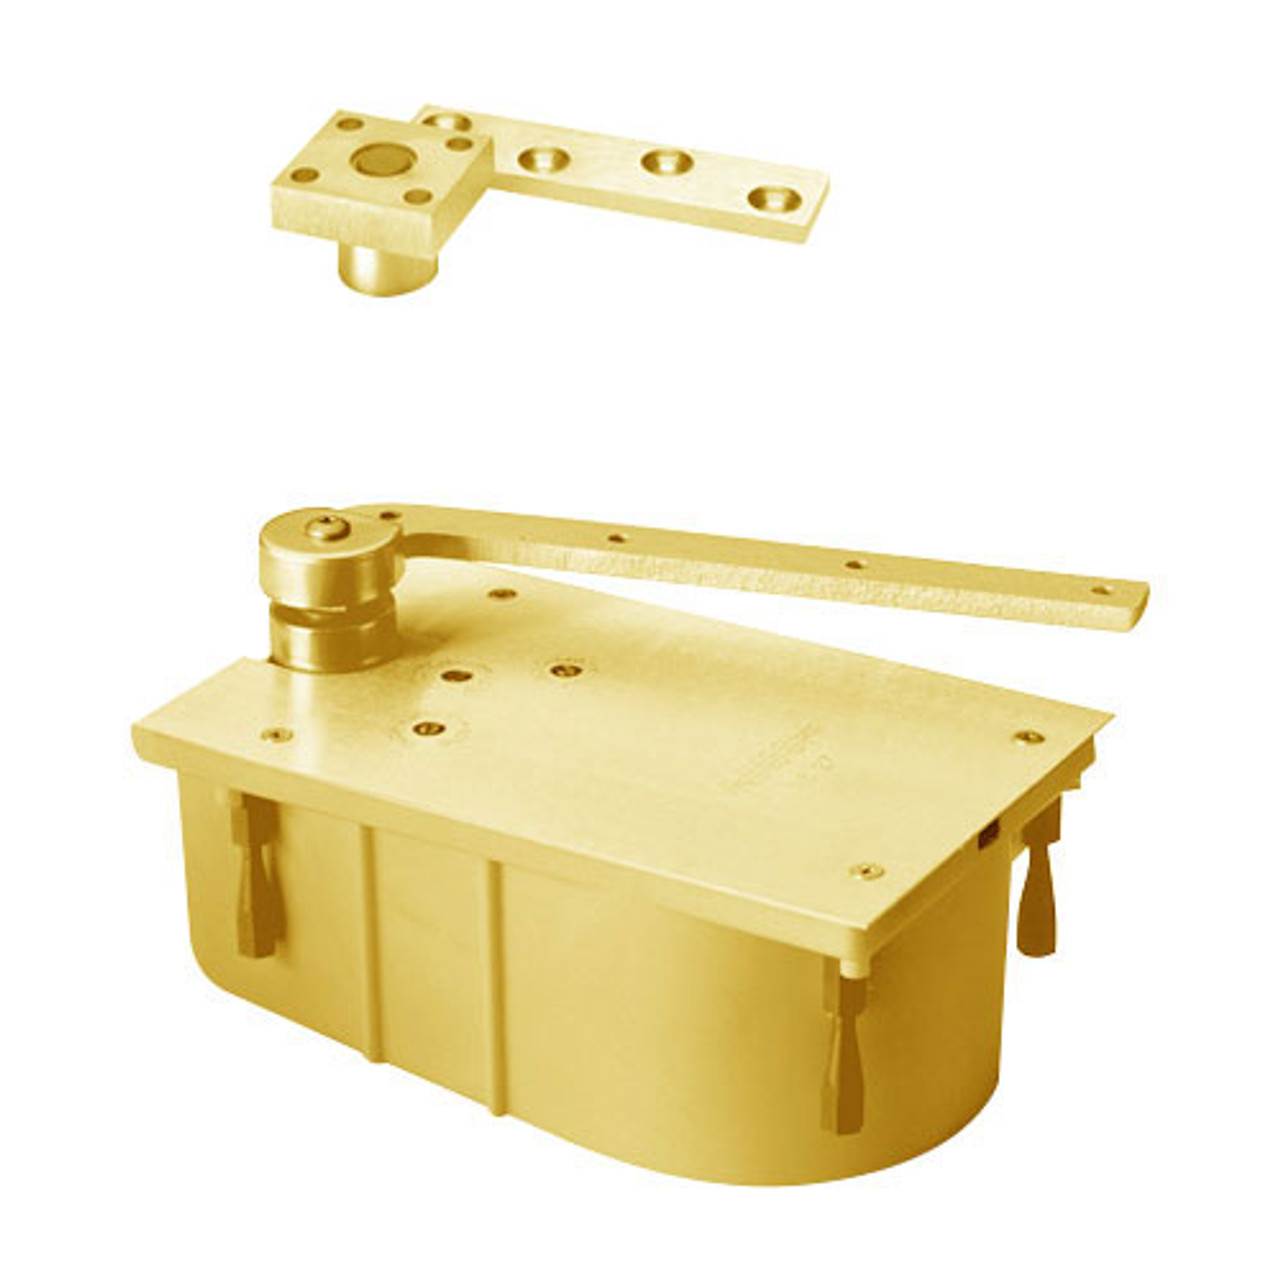 427-90S-LFP-CWF-LH-605 Rixson 427 Series Heavy Duty 3/4" Offset Hung Floor Closer in Bright Brass Finish